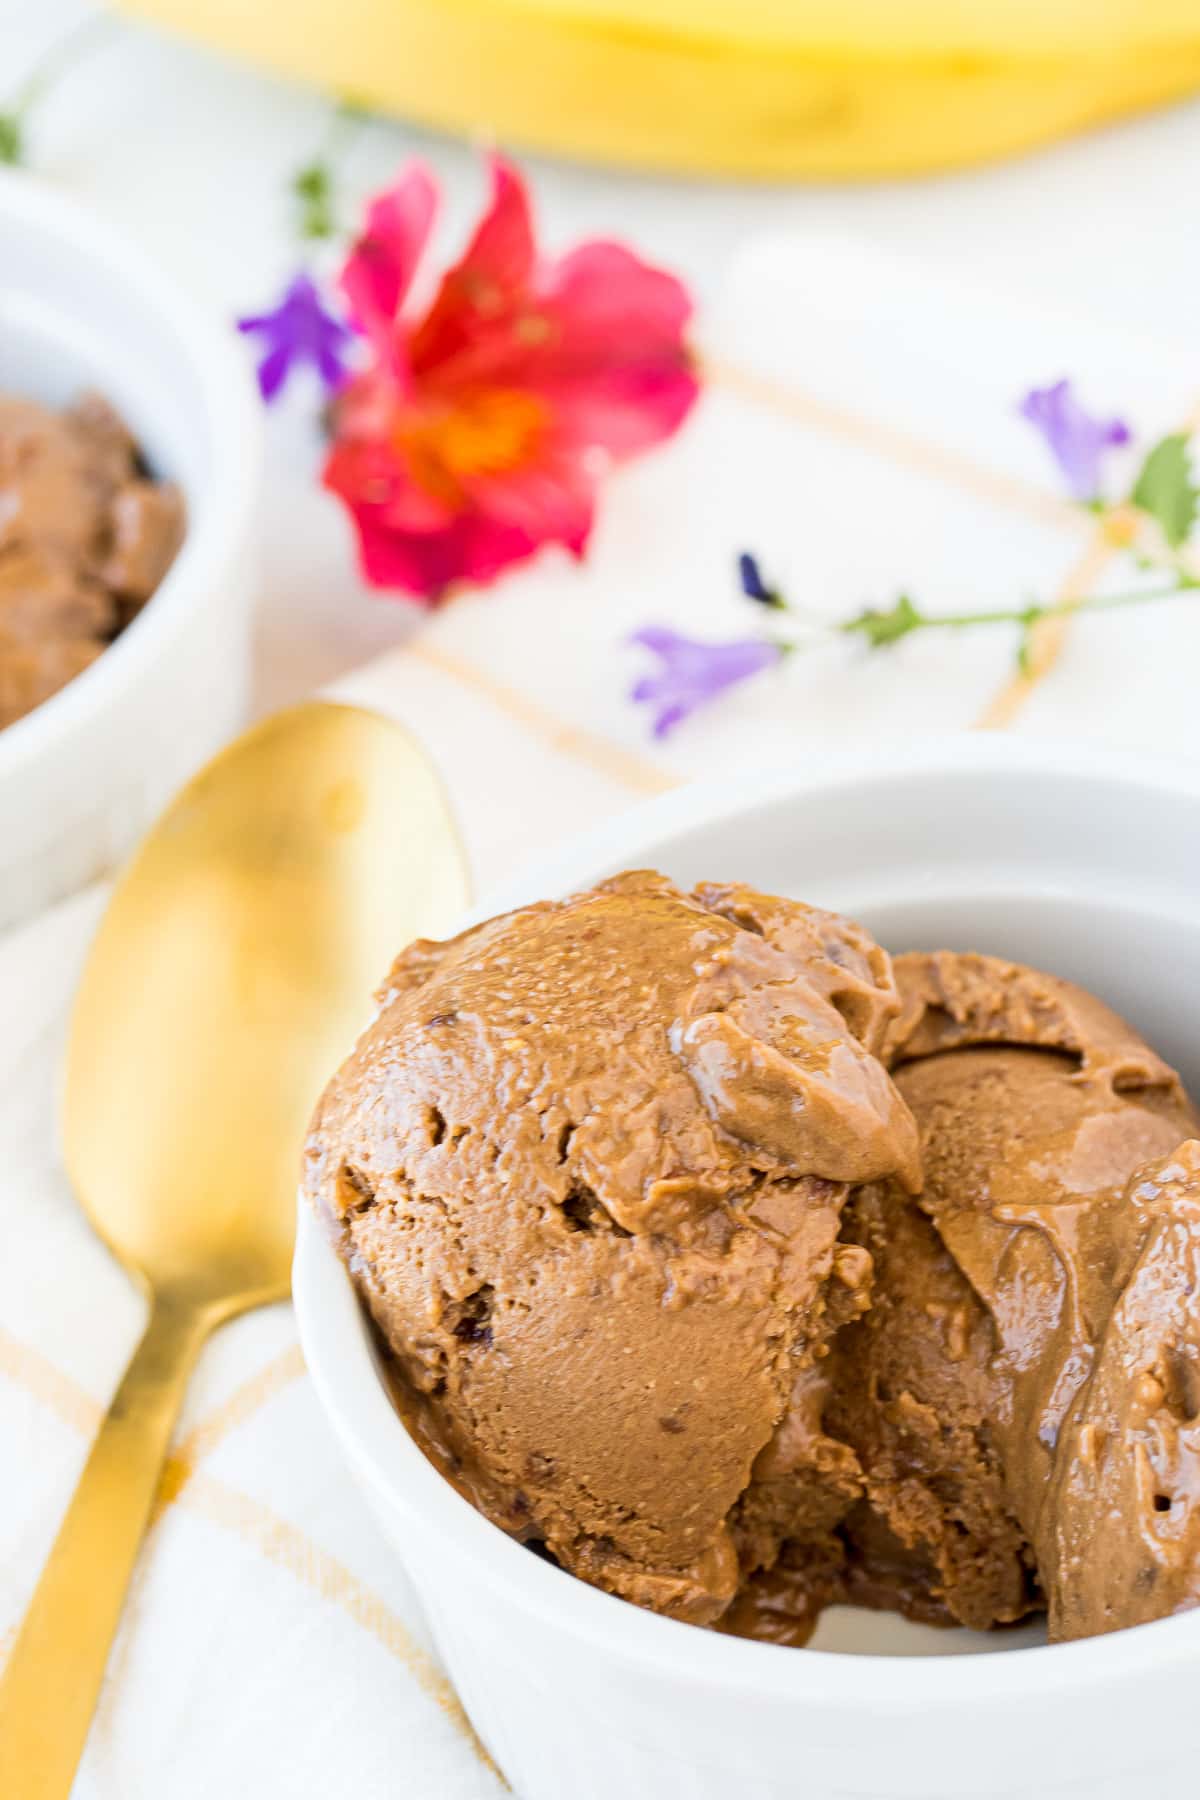 bowl of chocolate soft serve ice cream with a gold spoon